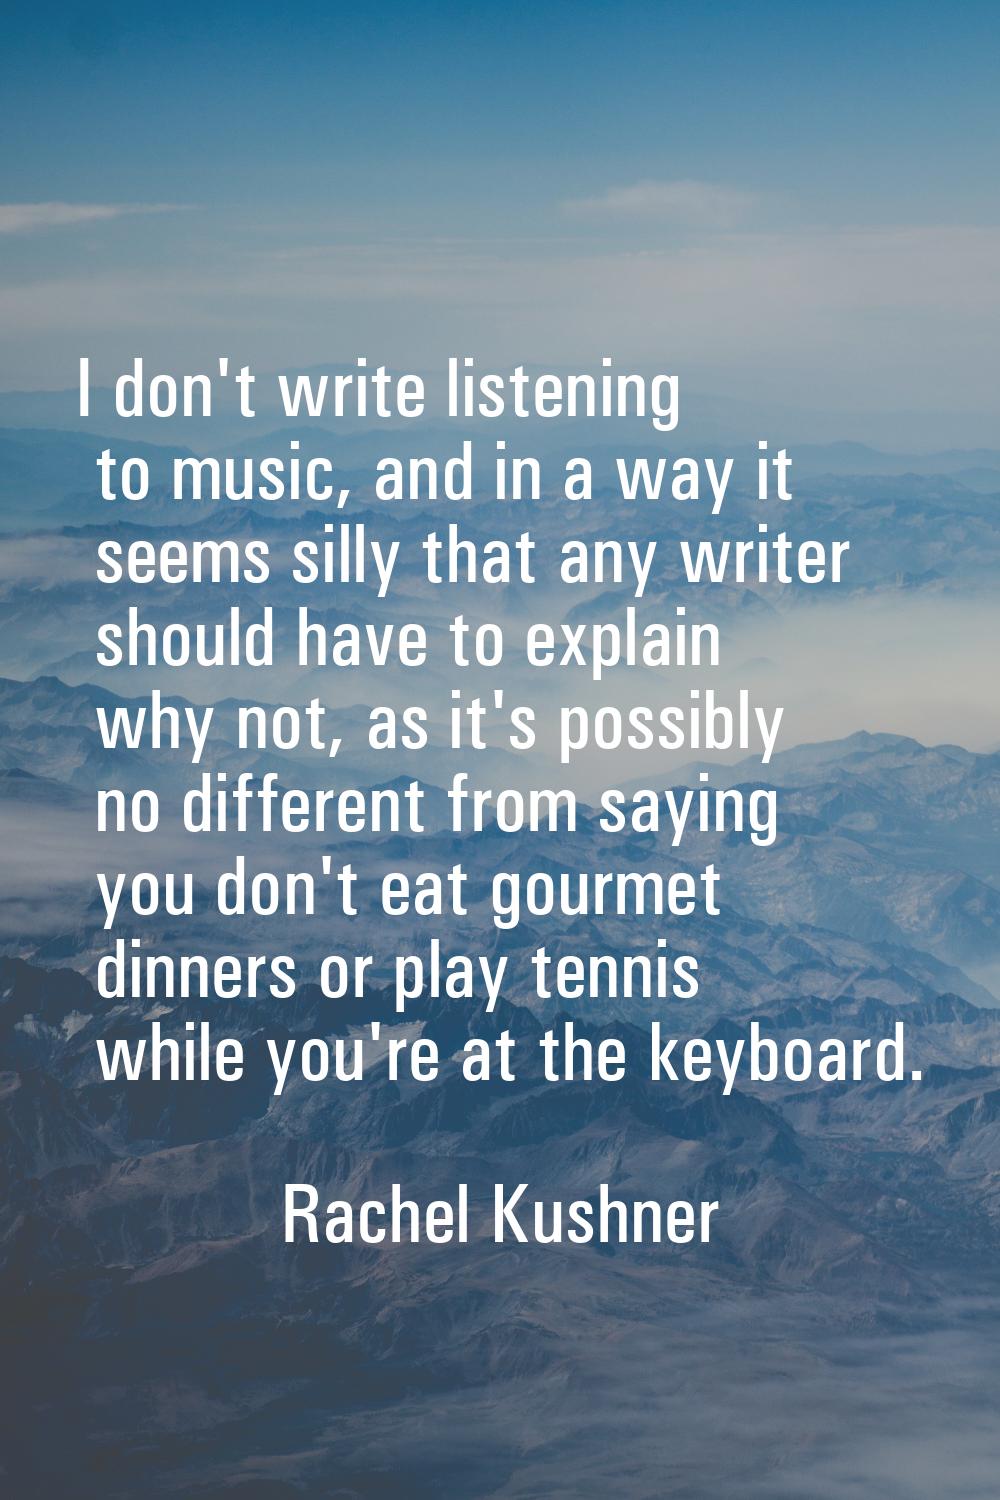 I don't write listening to music, and in a way it seems silly that any writer should have to explai